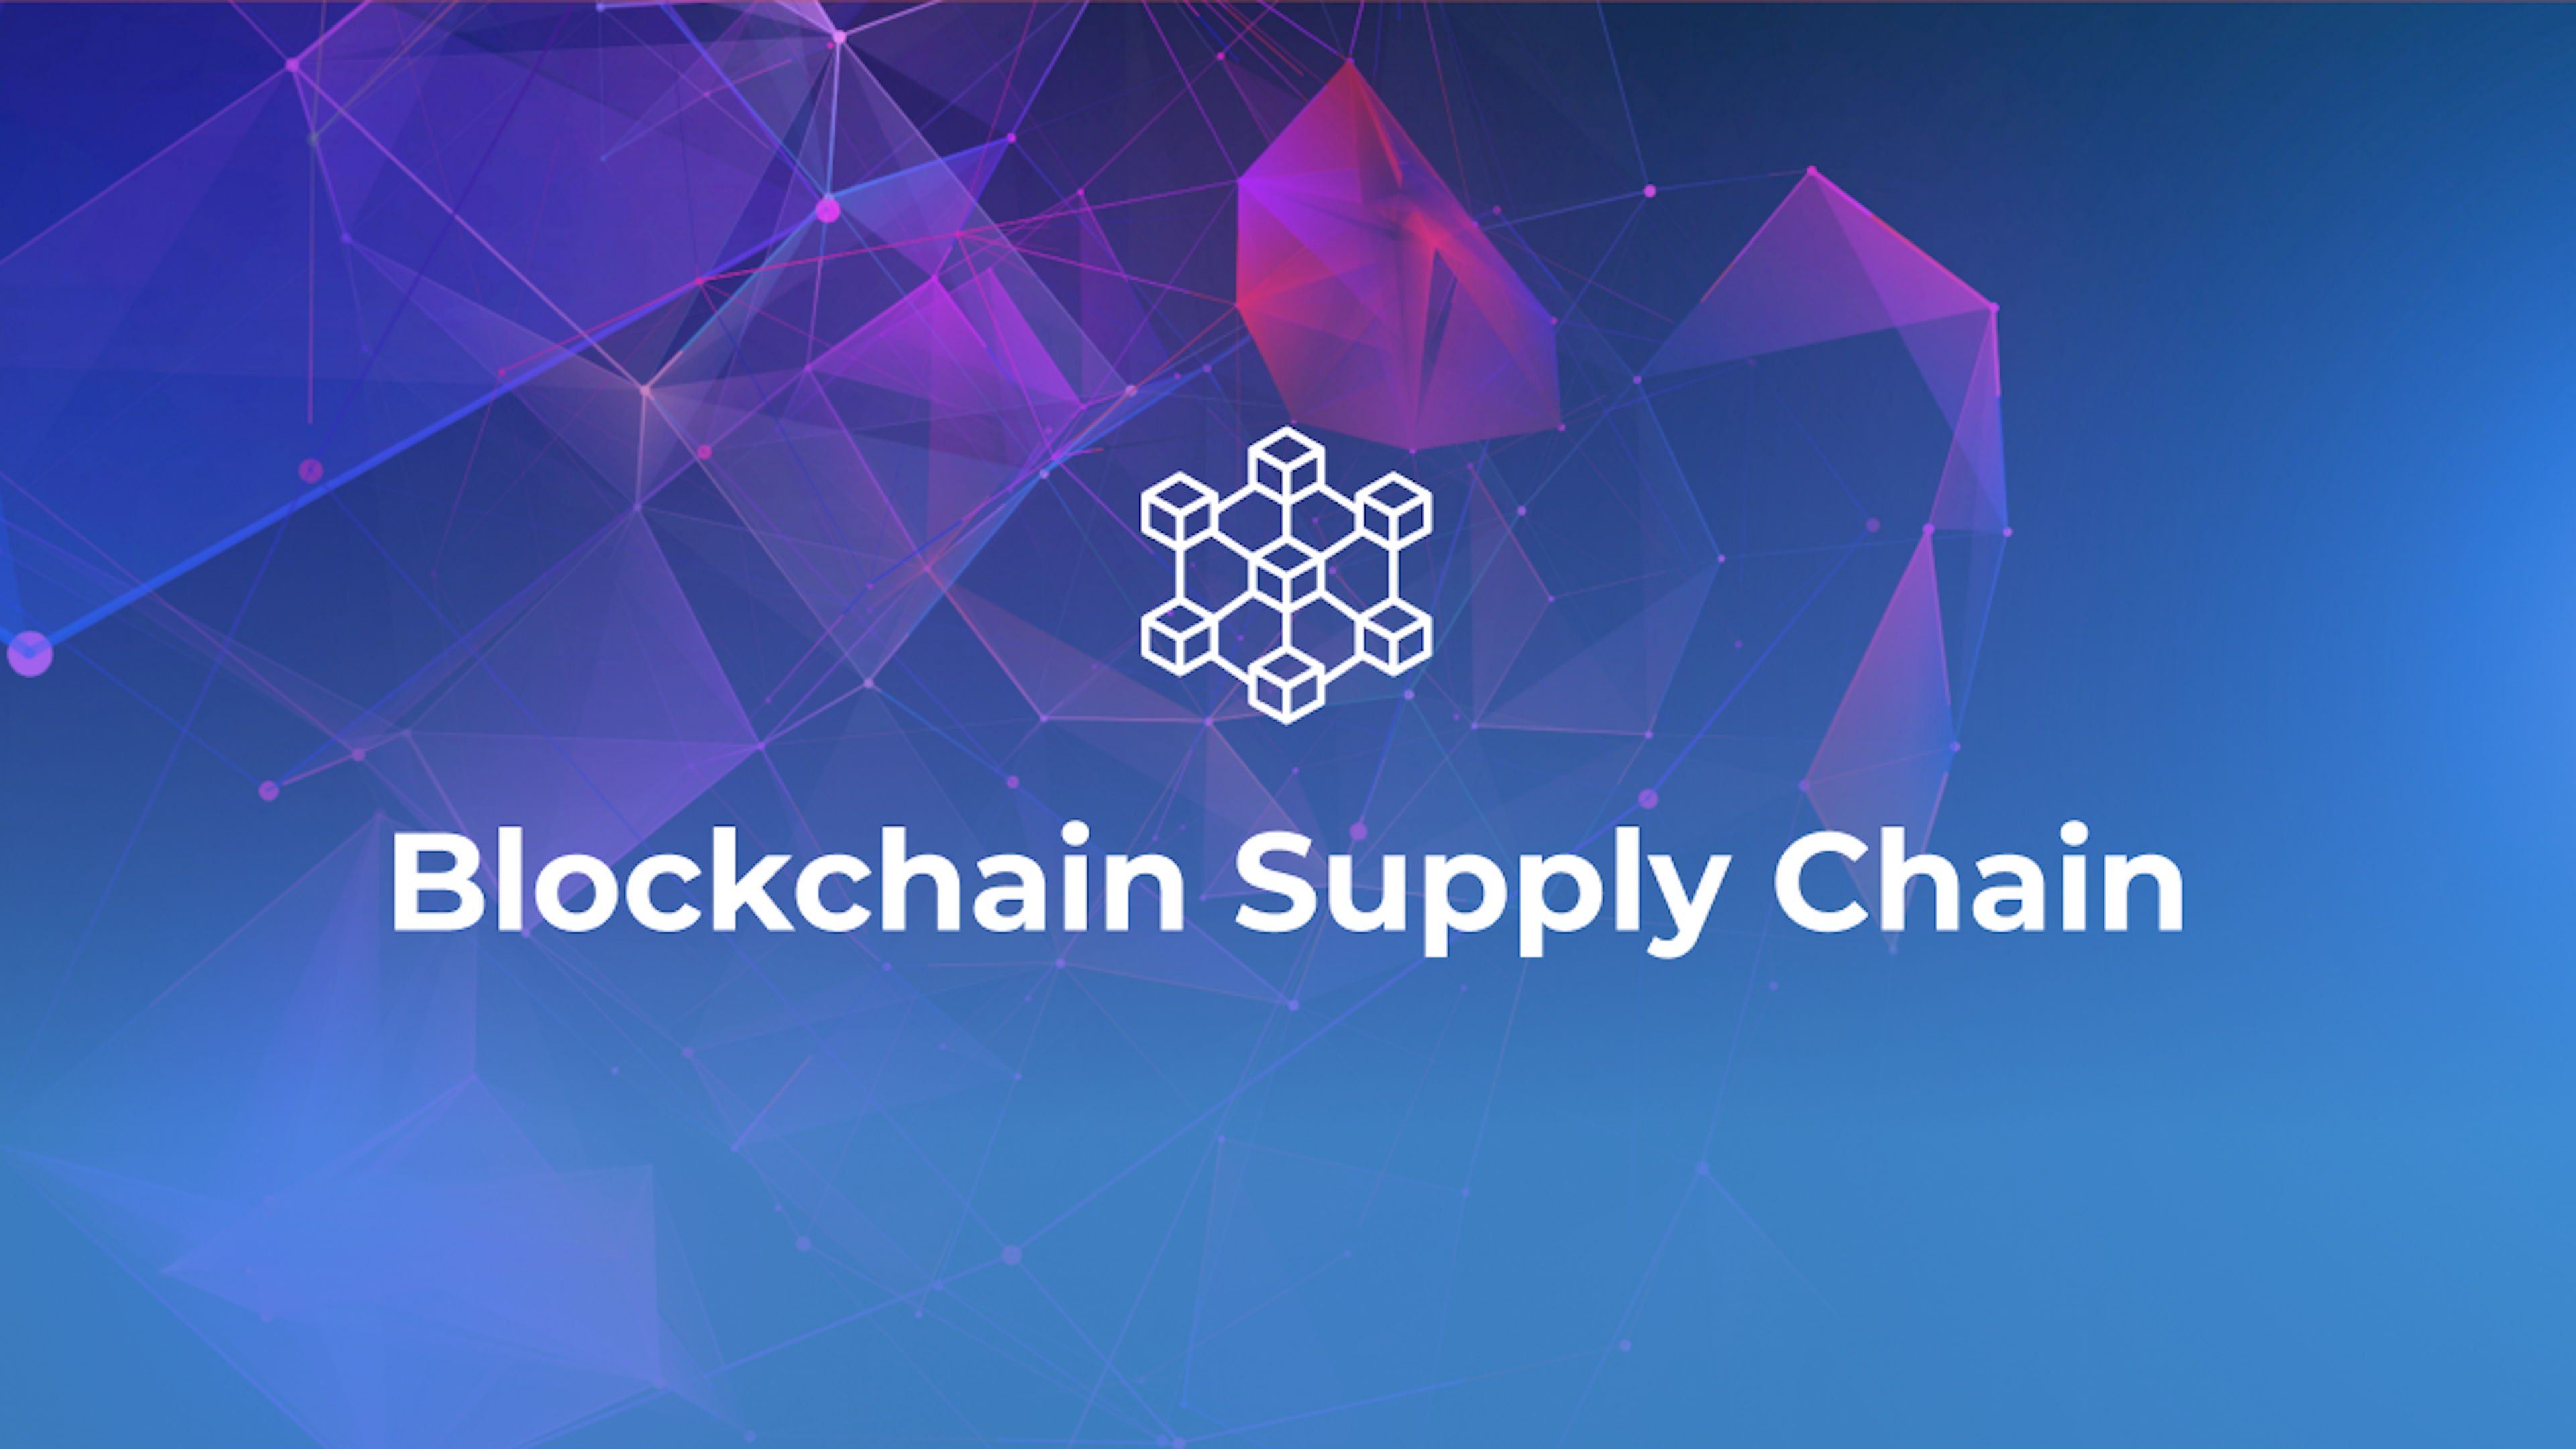 Blockchain In Supply Chain Opens A New Opportunity To Improve Efficiency And Transparency